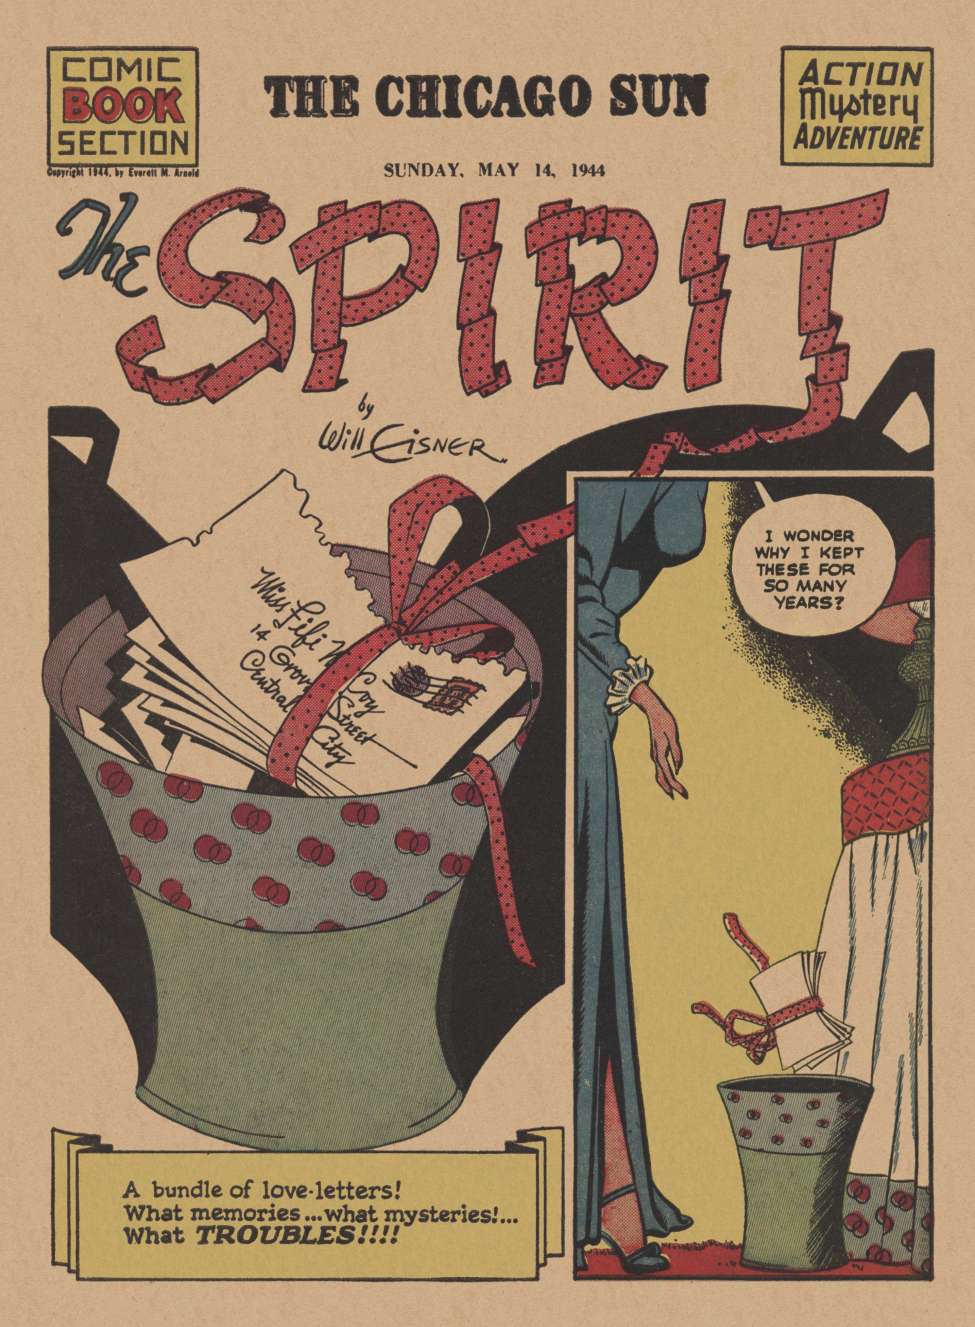 Comic Book Cover For The Spirit (1944-05-14) - Chicago Sun